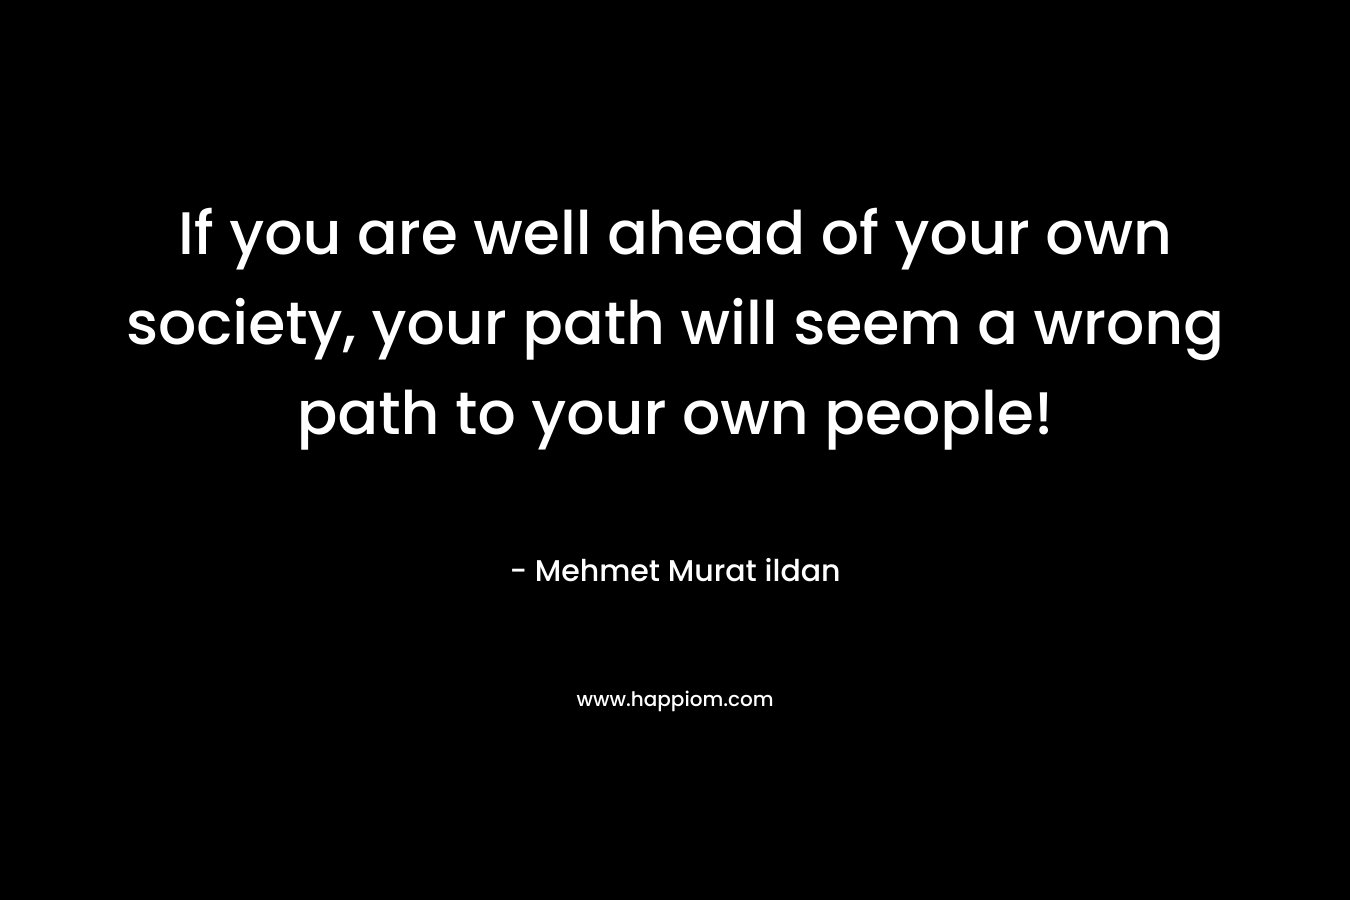 If you are well ahead of your own society, your path will seem a wrong path to your own people!